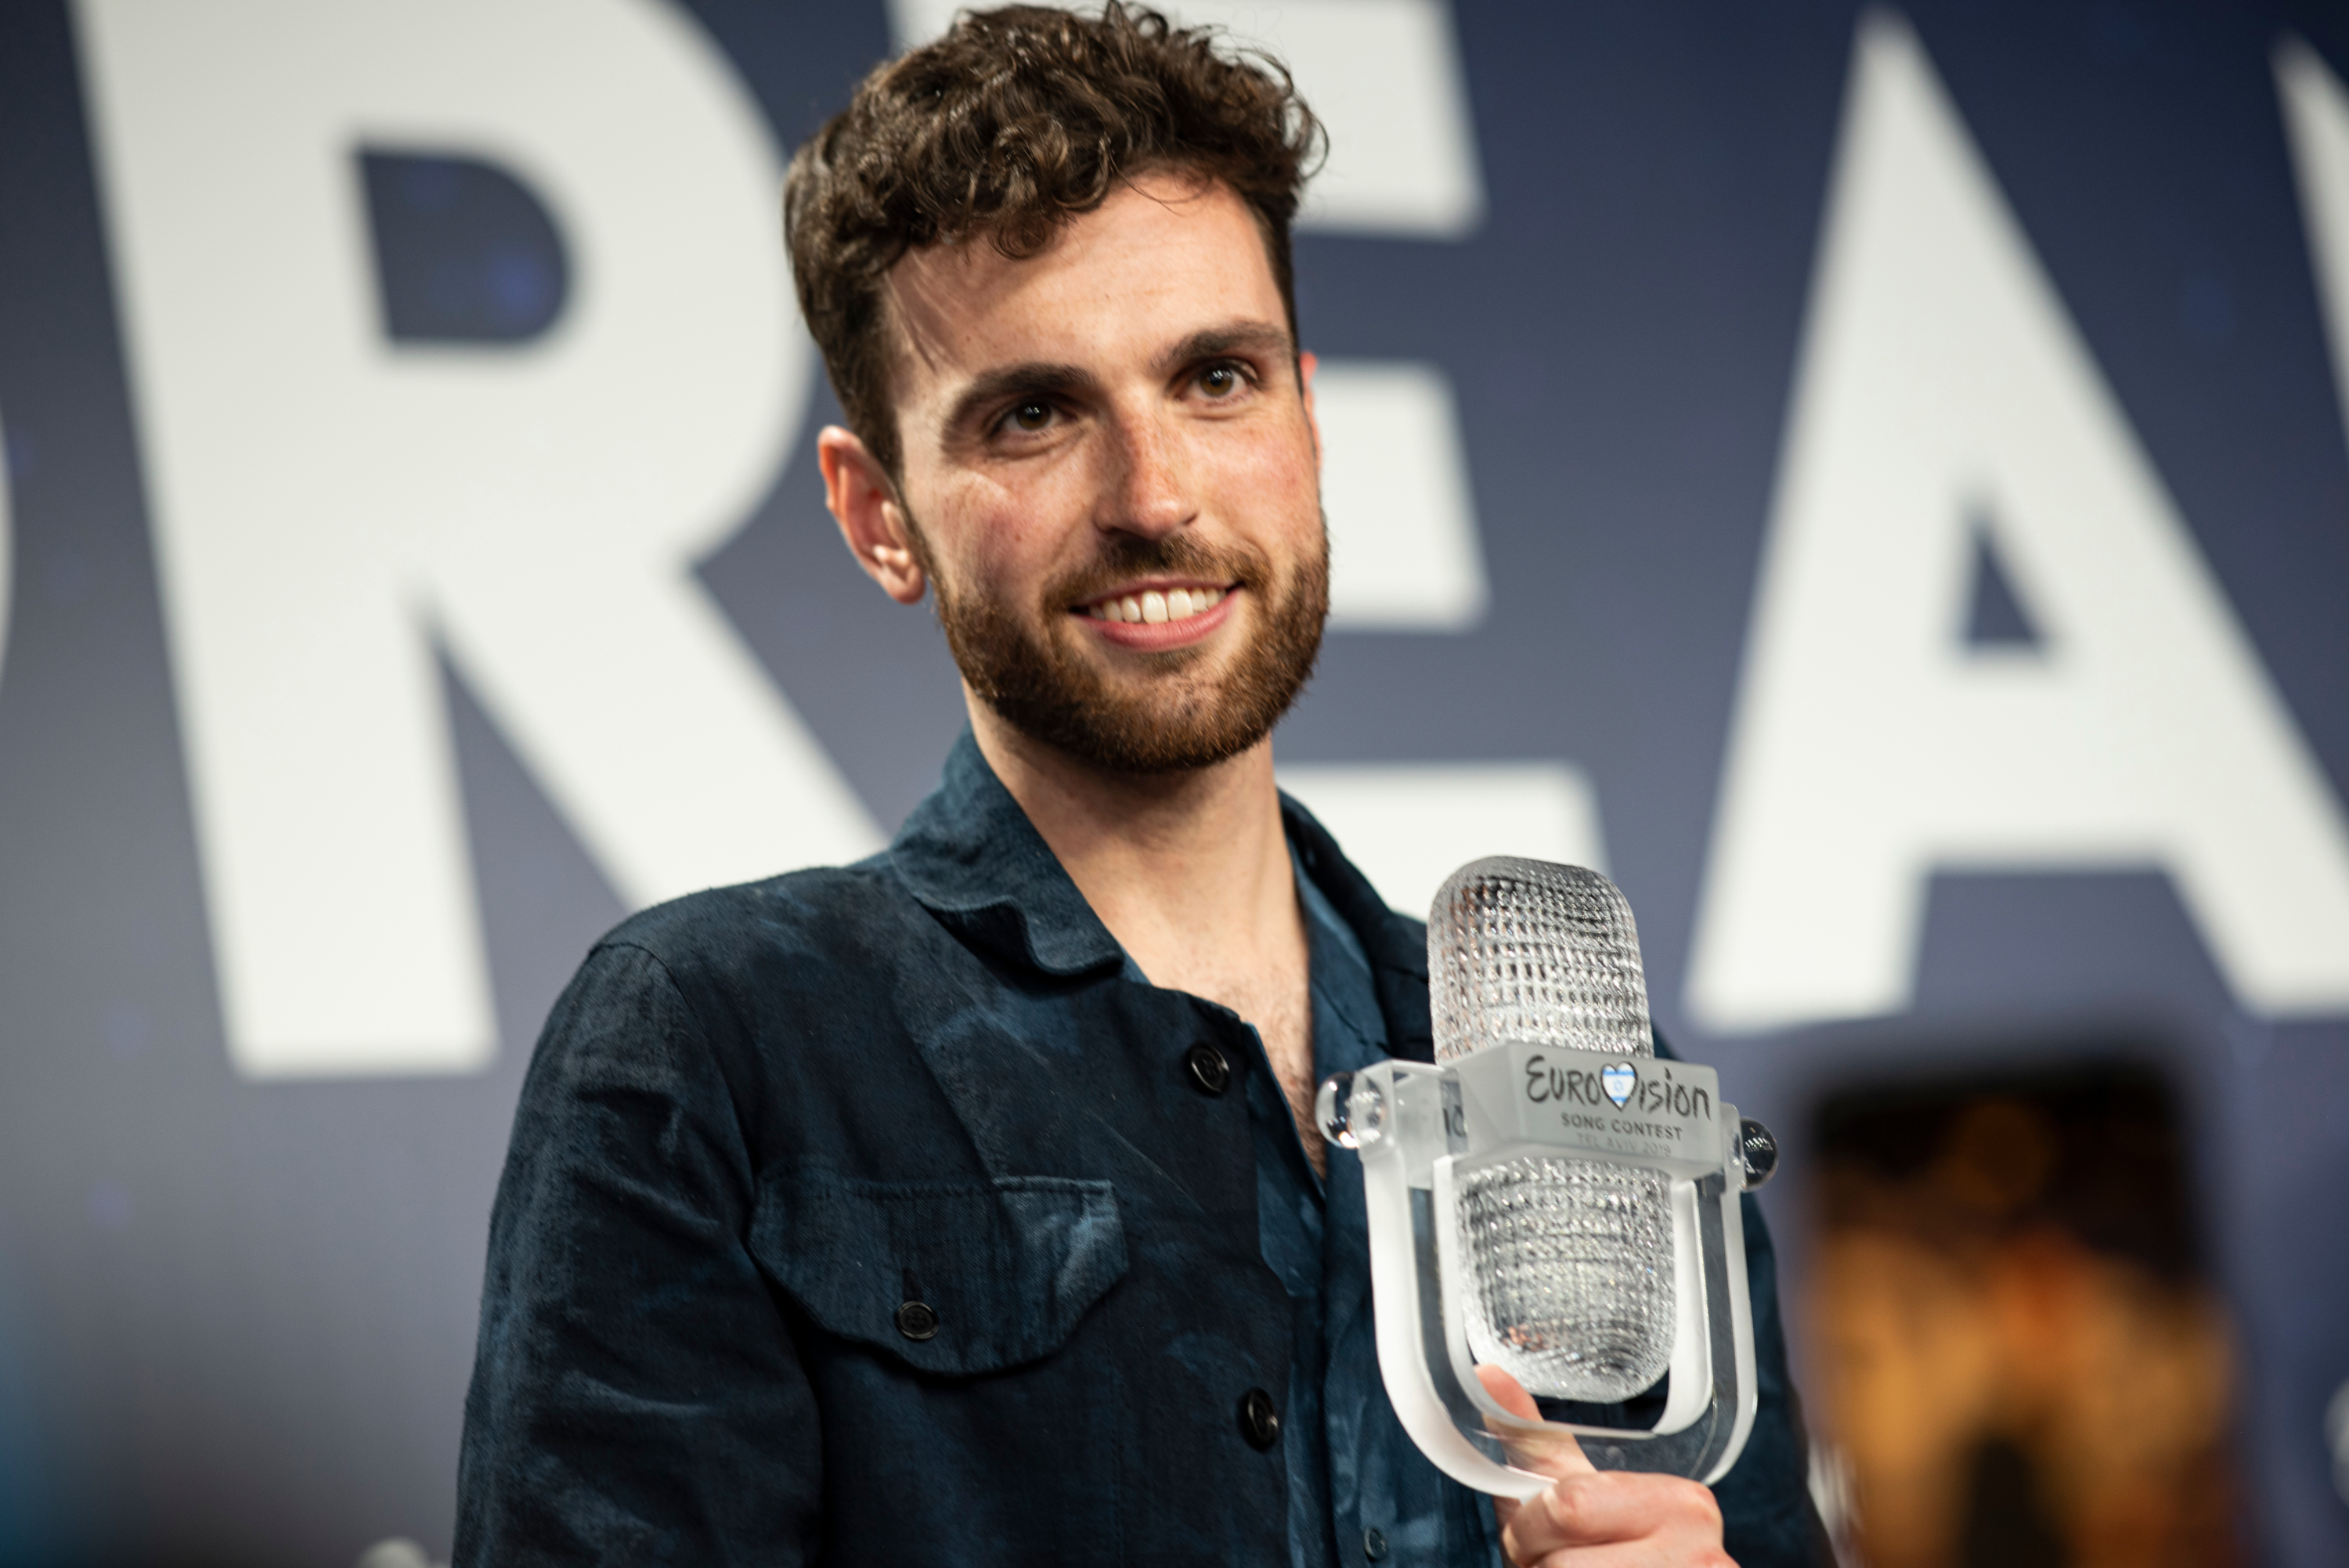 Duncan Laurence HD Wallpaper Background Image 3000x2003 3000x2003